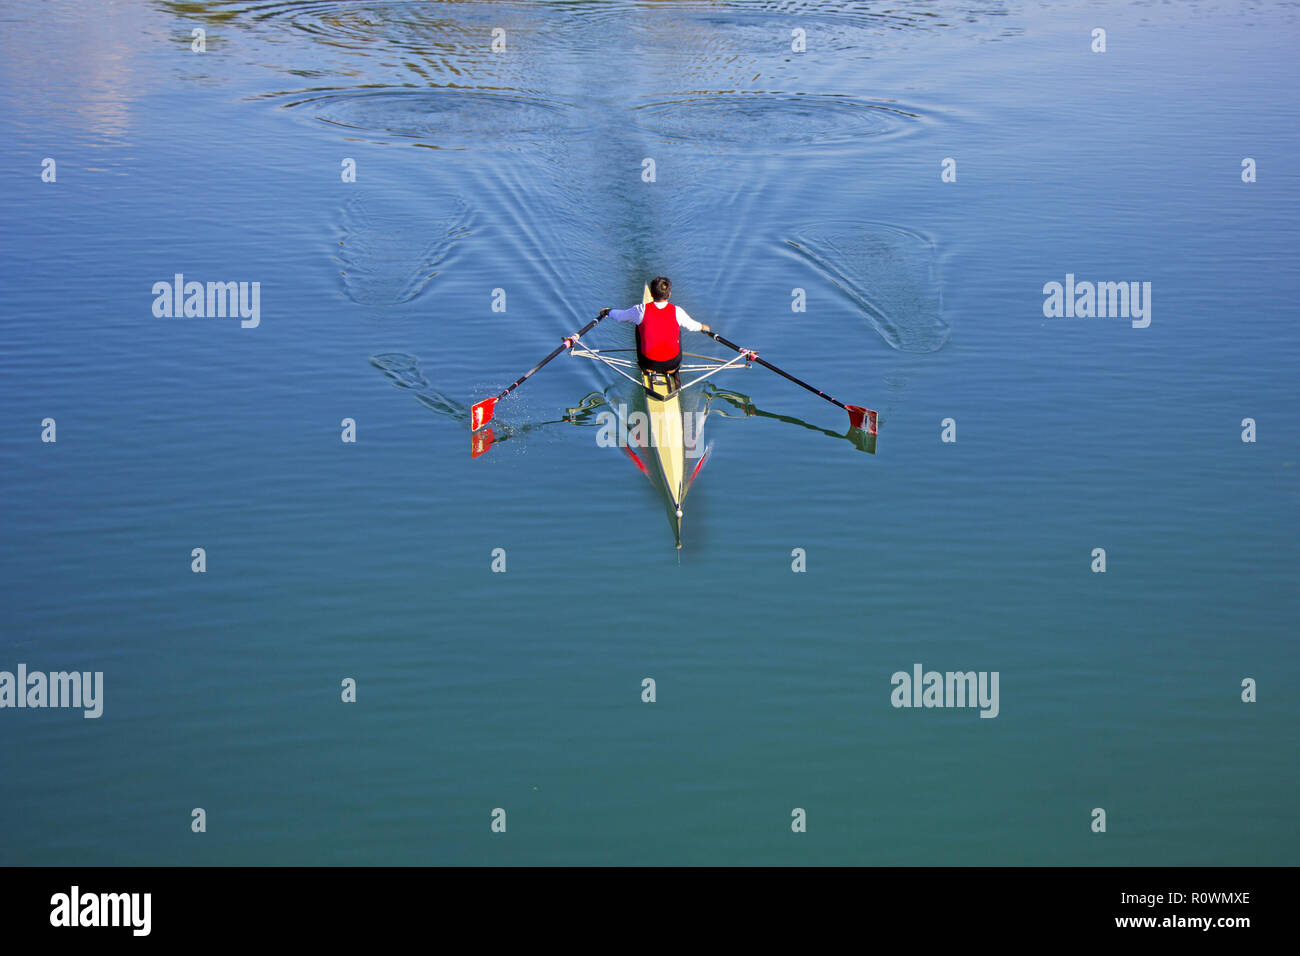 Single scull rowing competitor, rowing race one rower Stock Photo